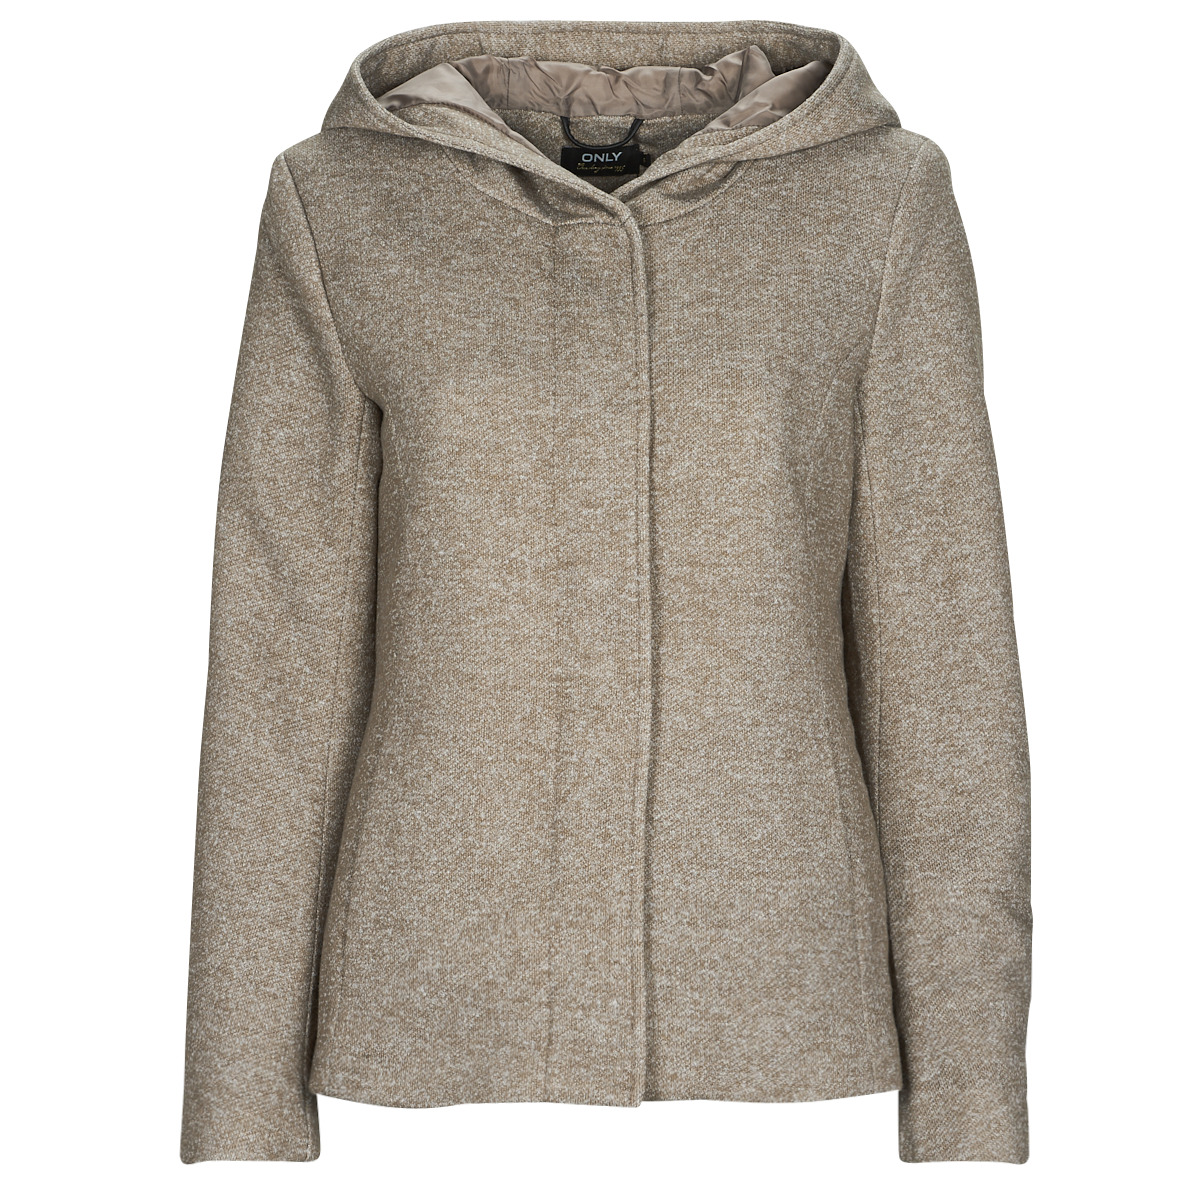 delivery JACKET | - coats LIGHT Women ! SHORT Spartoo NET - Free Brown ONLSEDONA Clothing Only